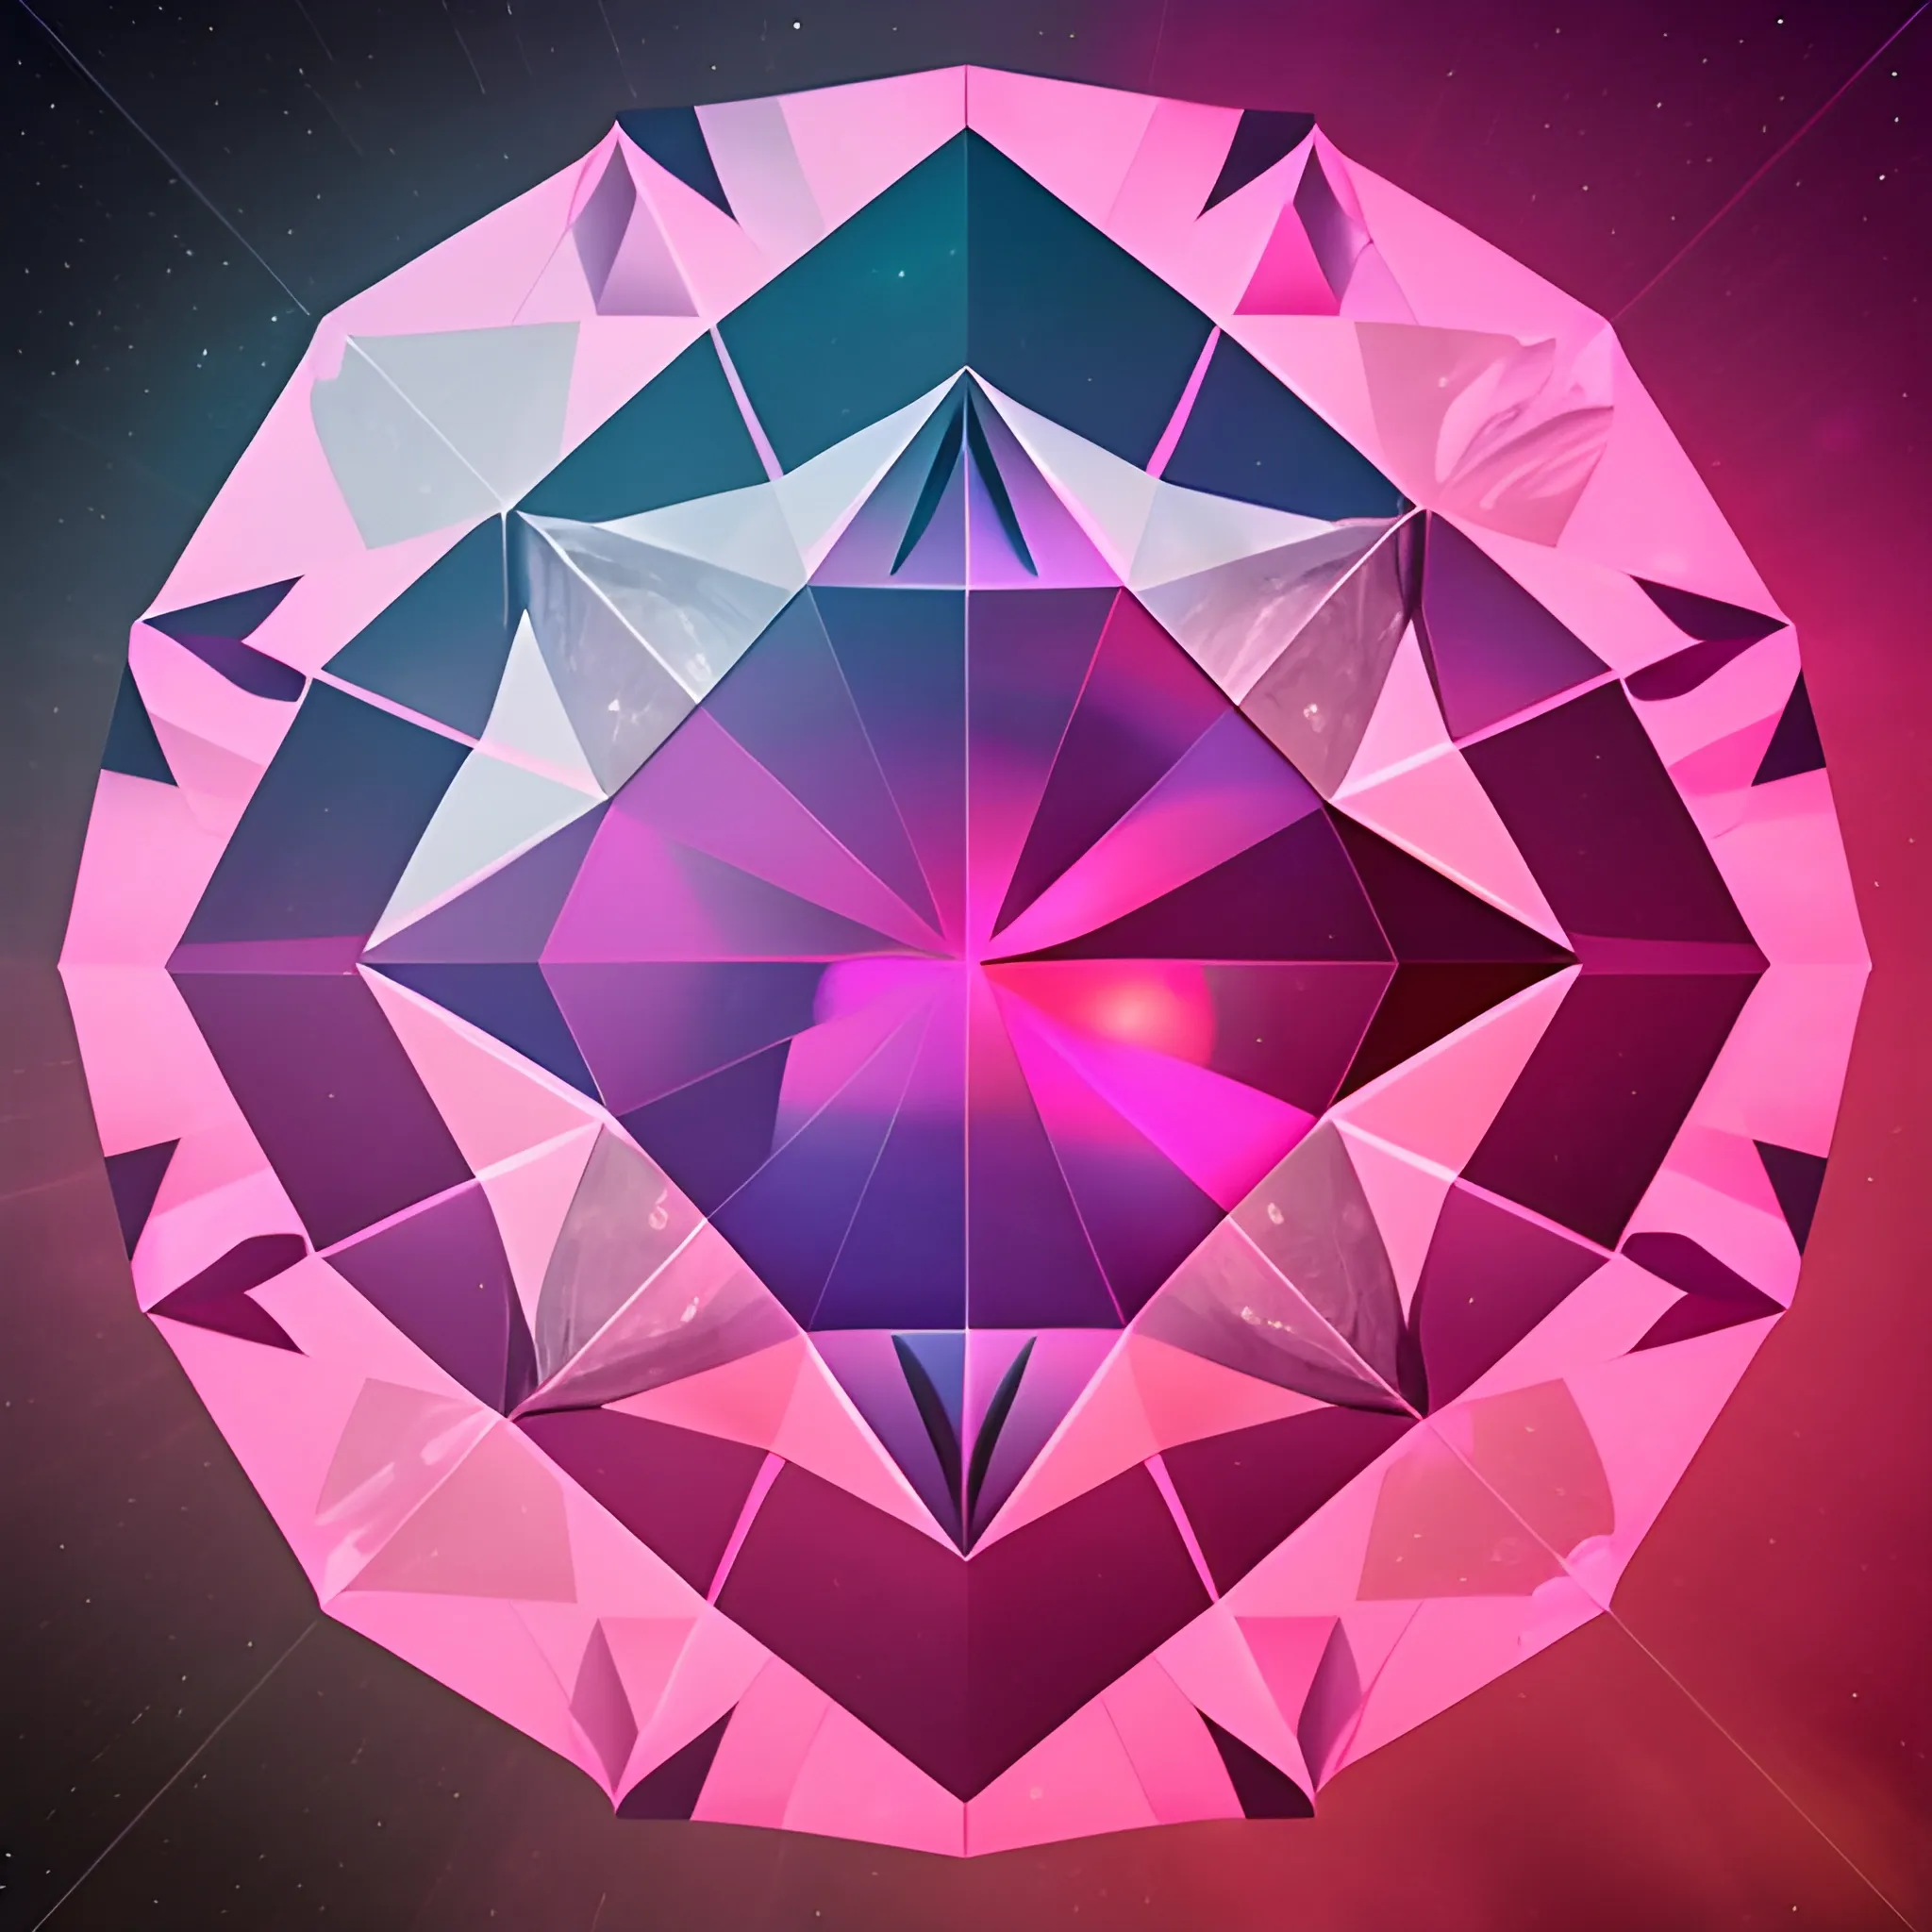 Geometric diamond on the background of space and planets, pink shades, noise, Trippy